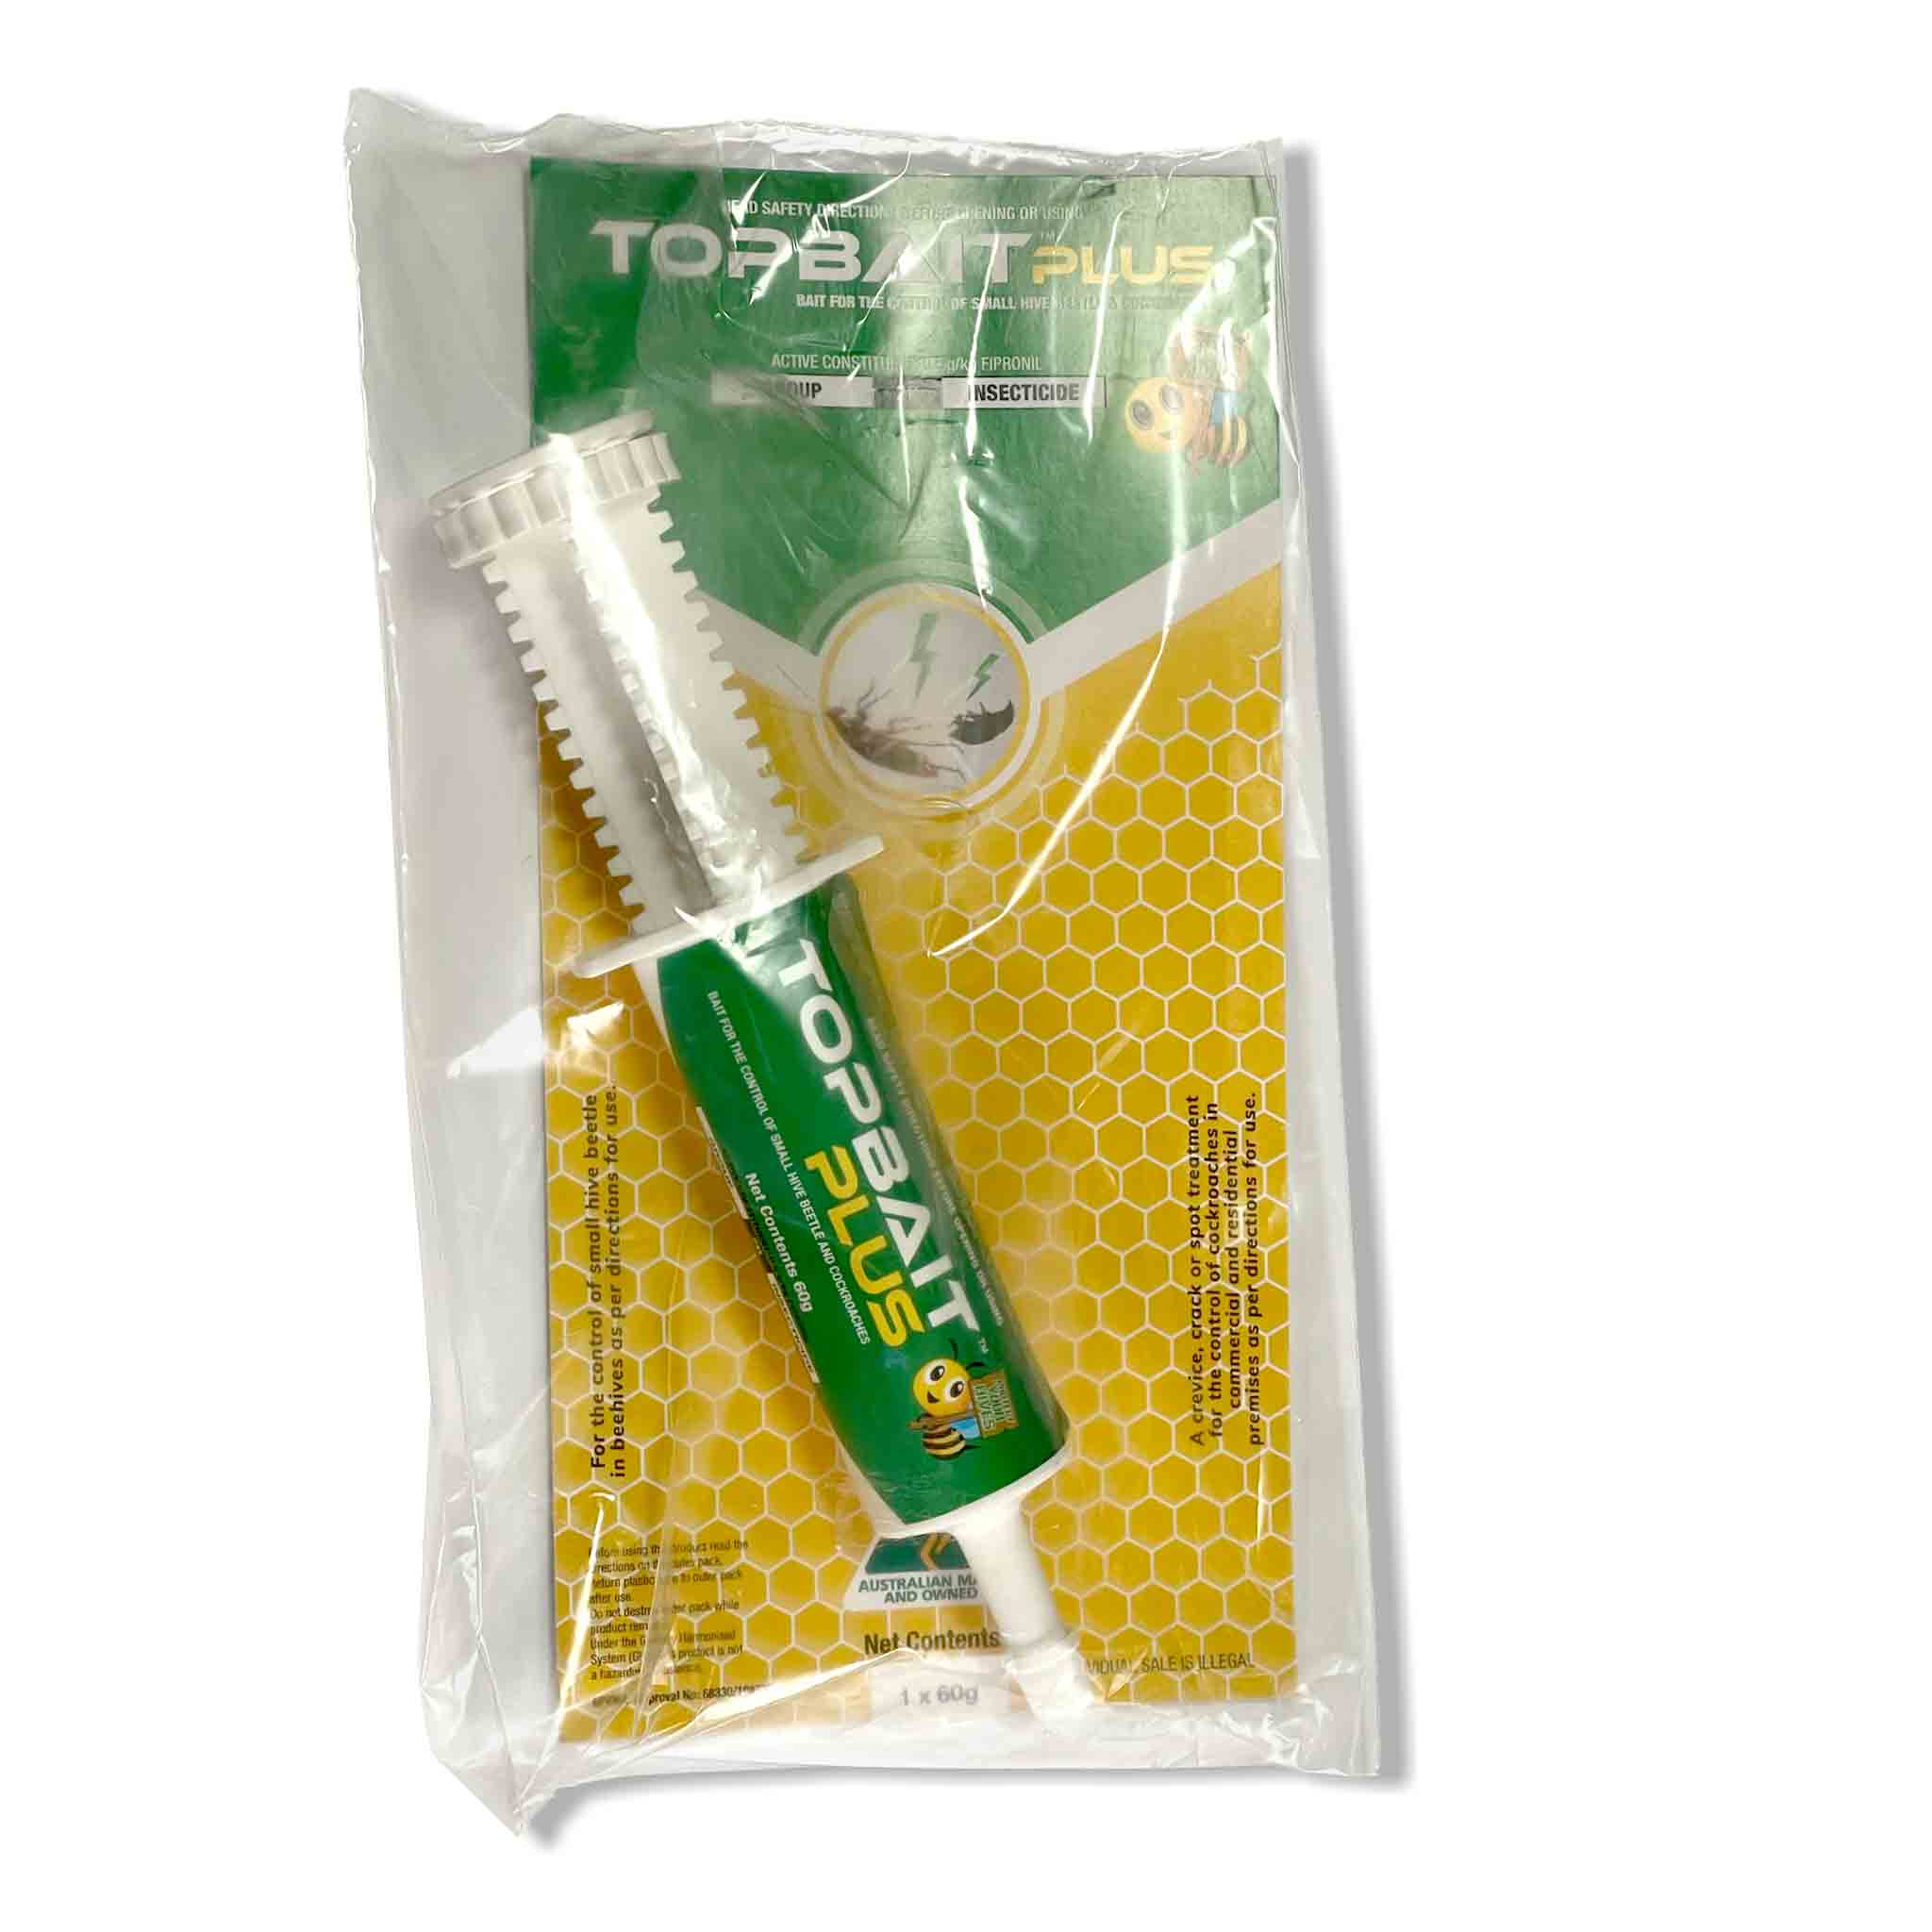 TopBait Plus 60g Applicator for Treatment and Control of Small Hive Beetles and Cockroaches - Health collection by Buzzbee Beekeeping Supplies